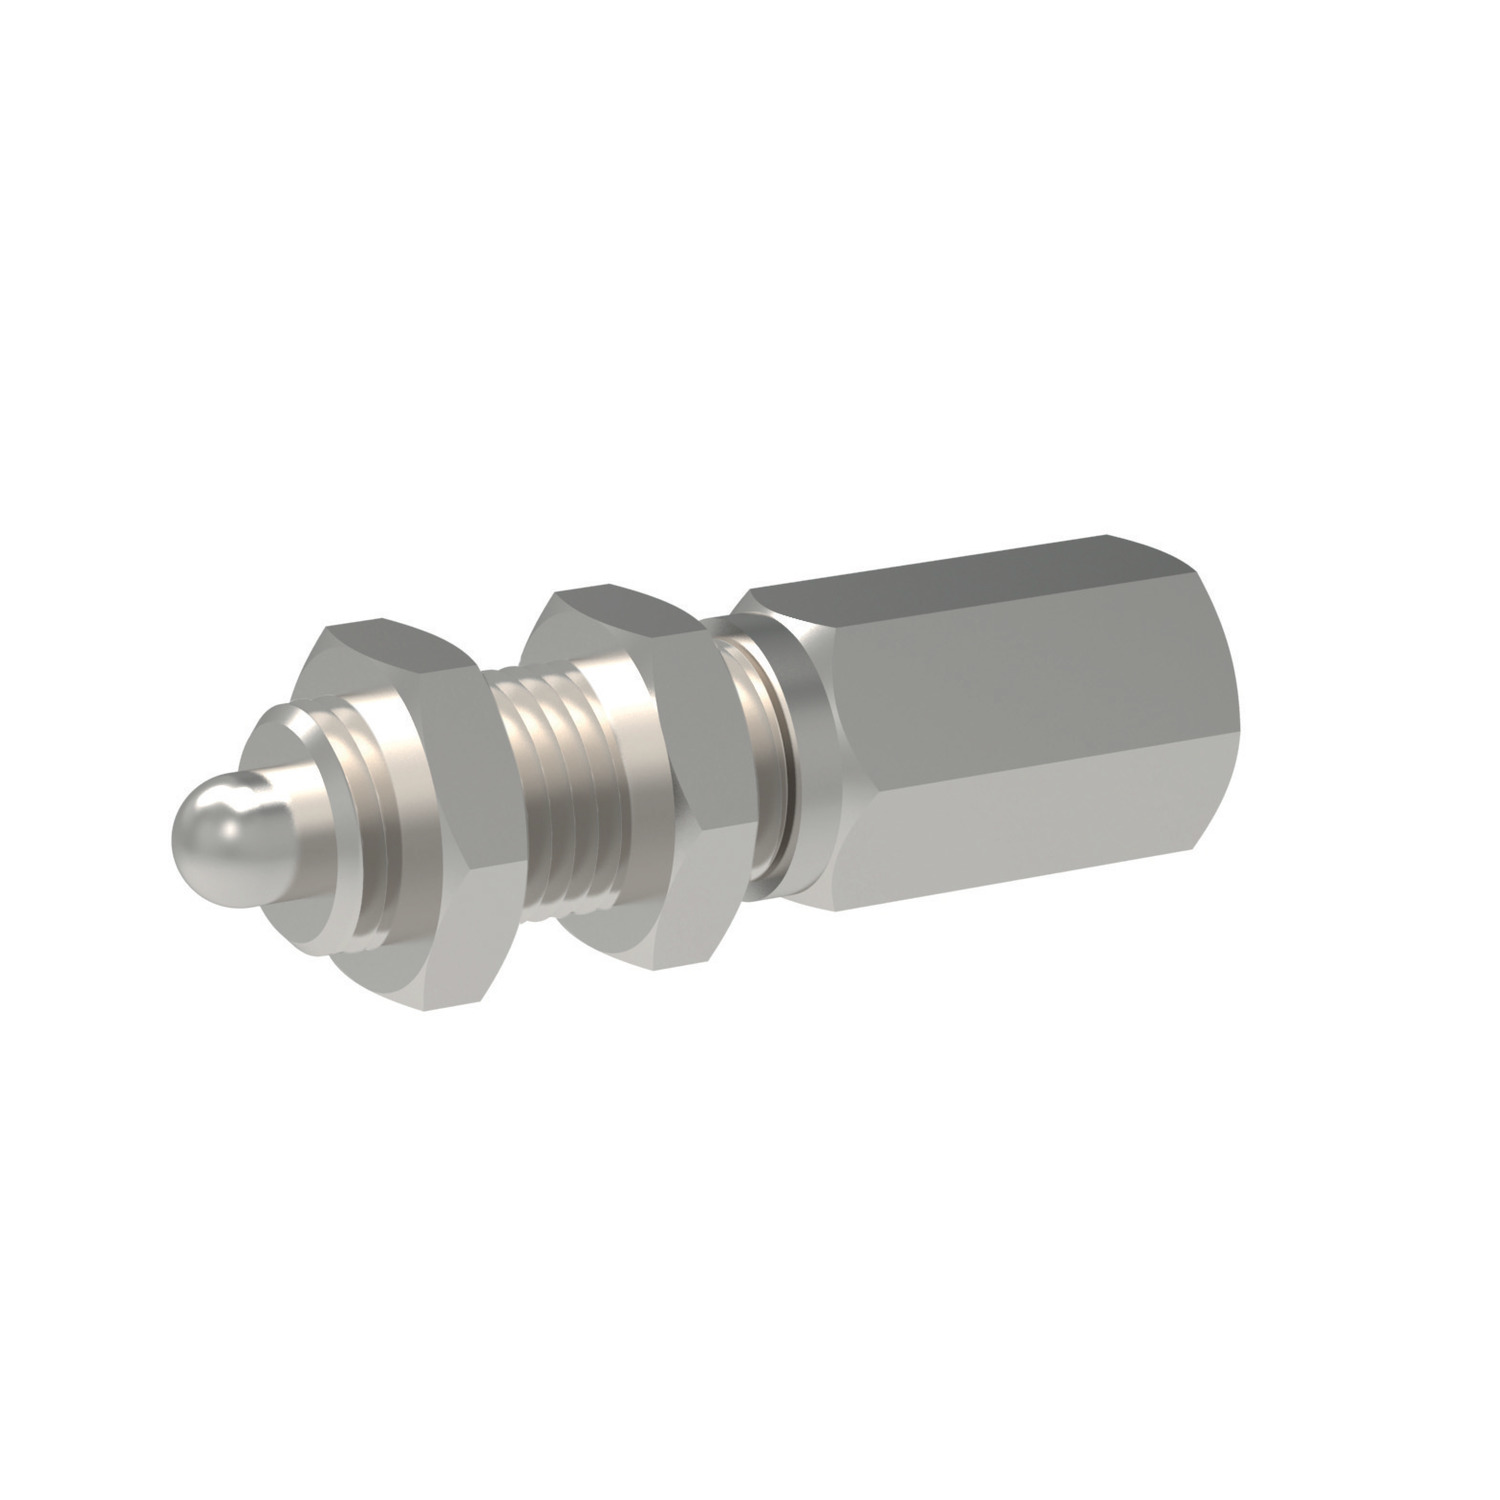 Product 38700, Sensing Elements with sensor adapter, stainless steel / 